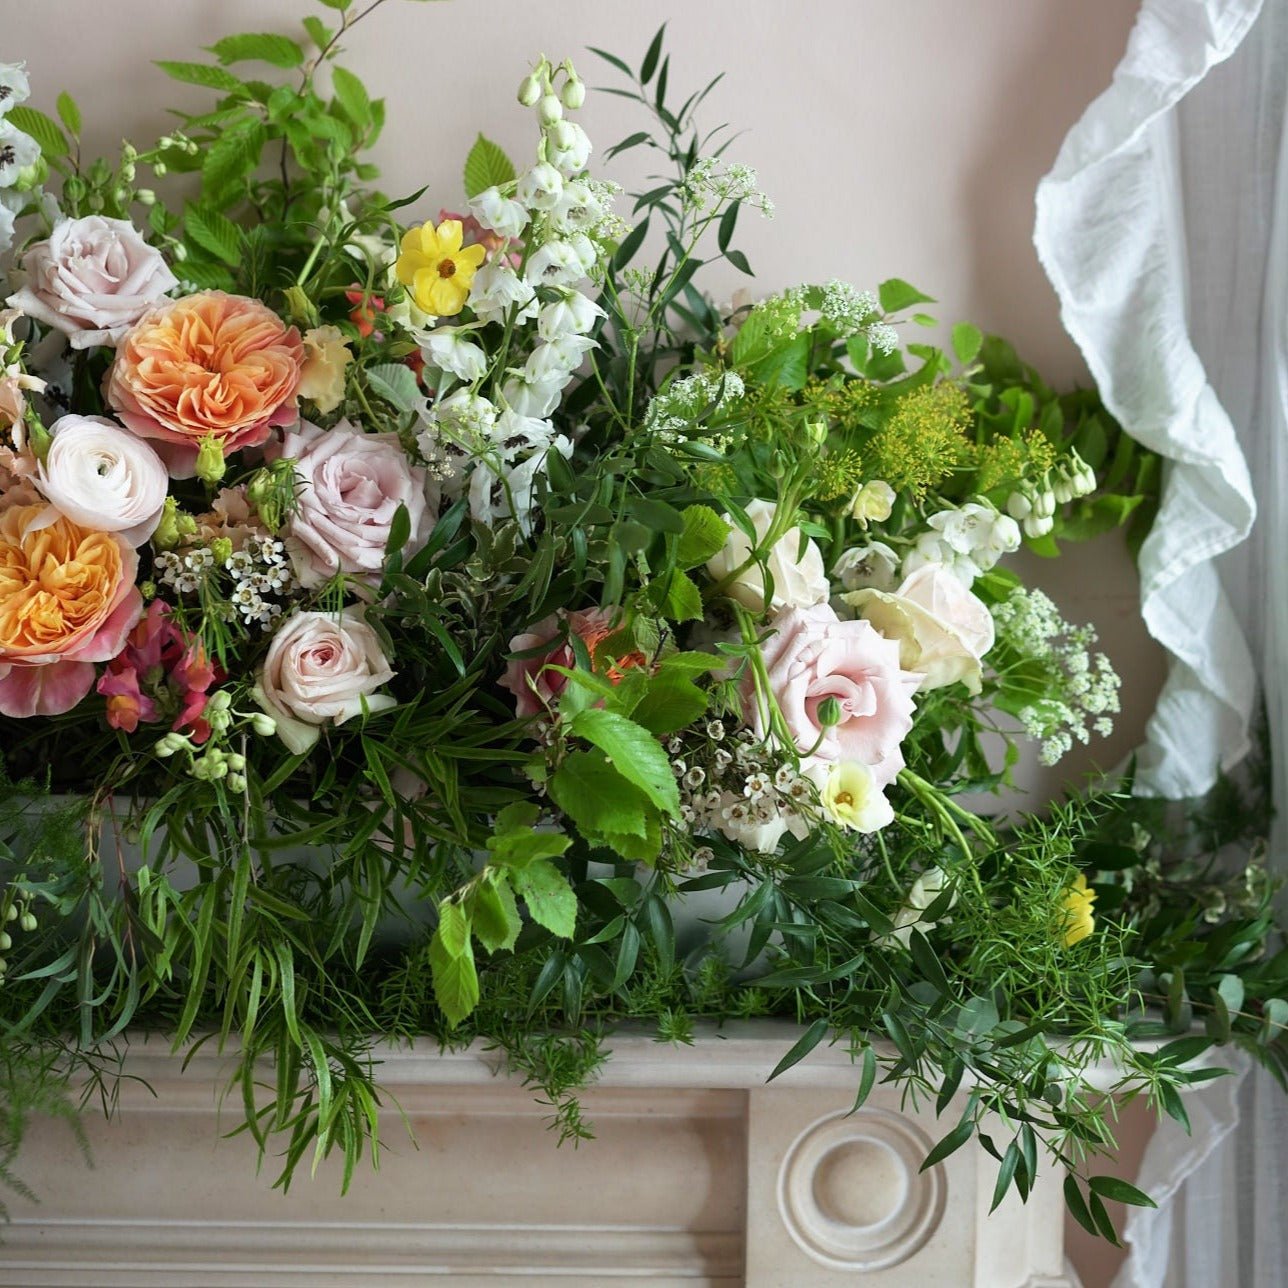 colourful and vibrant trough arrangement to dress up wedding venues and mantlepieces